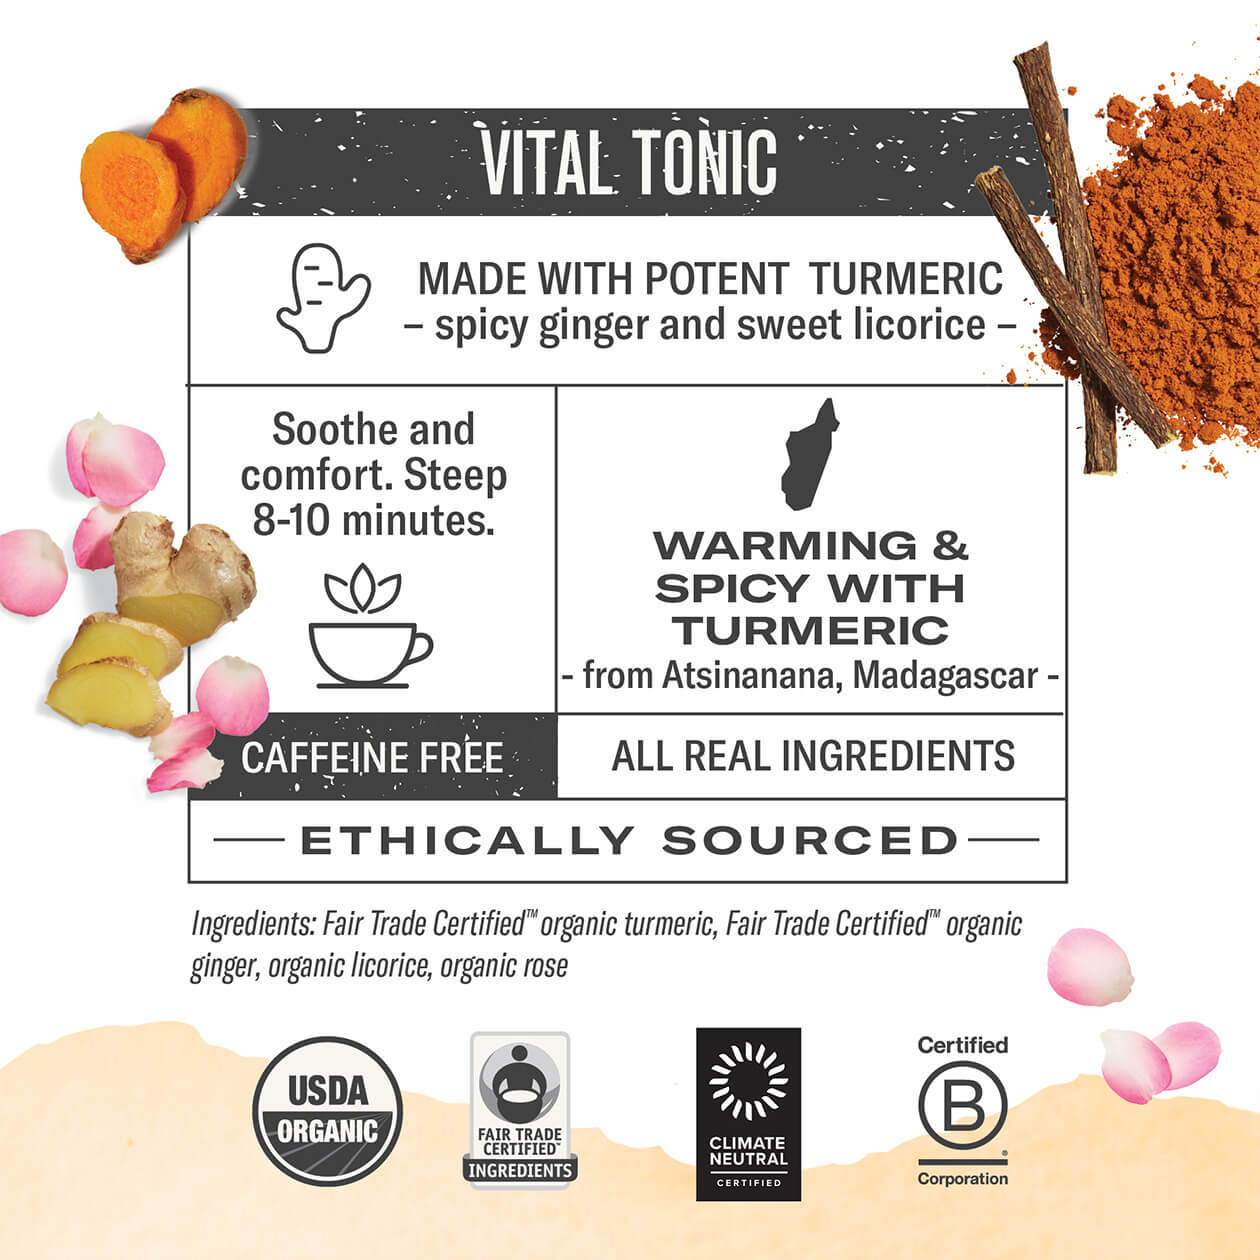 Infographic about Turmeric Three Roots: steep 8-10 minutes, origin: Madagascar, caffeine free, all real ingredients, ethically sourced